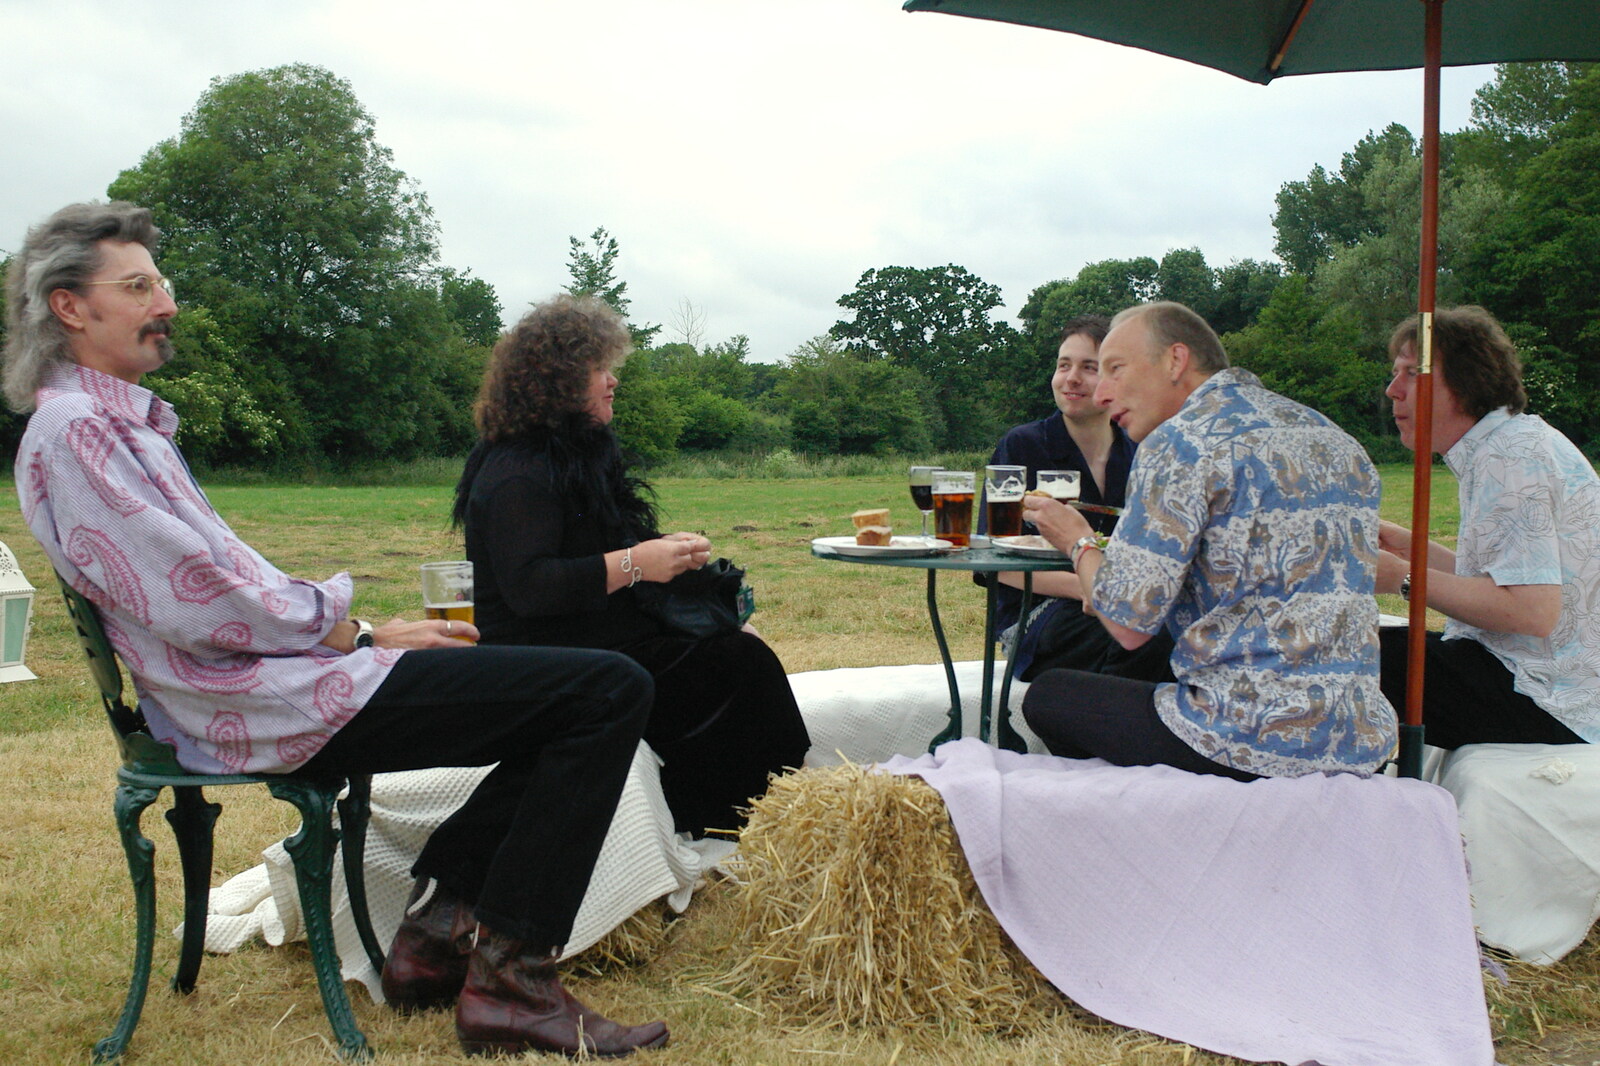 The band chats in a field from The BBs do a Wedding Gig at Syleham, Suffolk - 25th June 2005